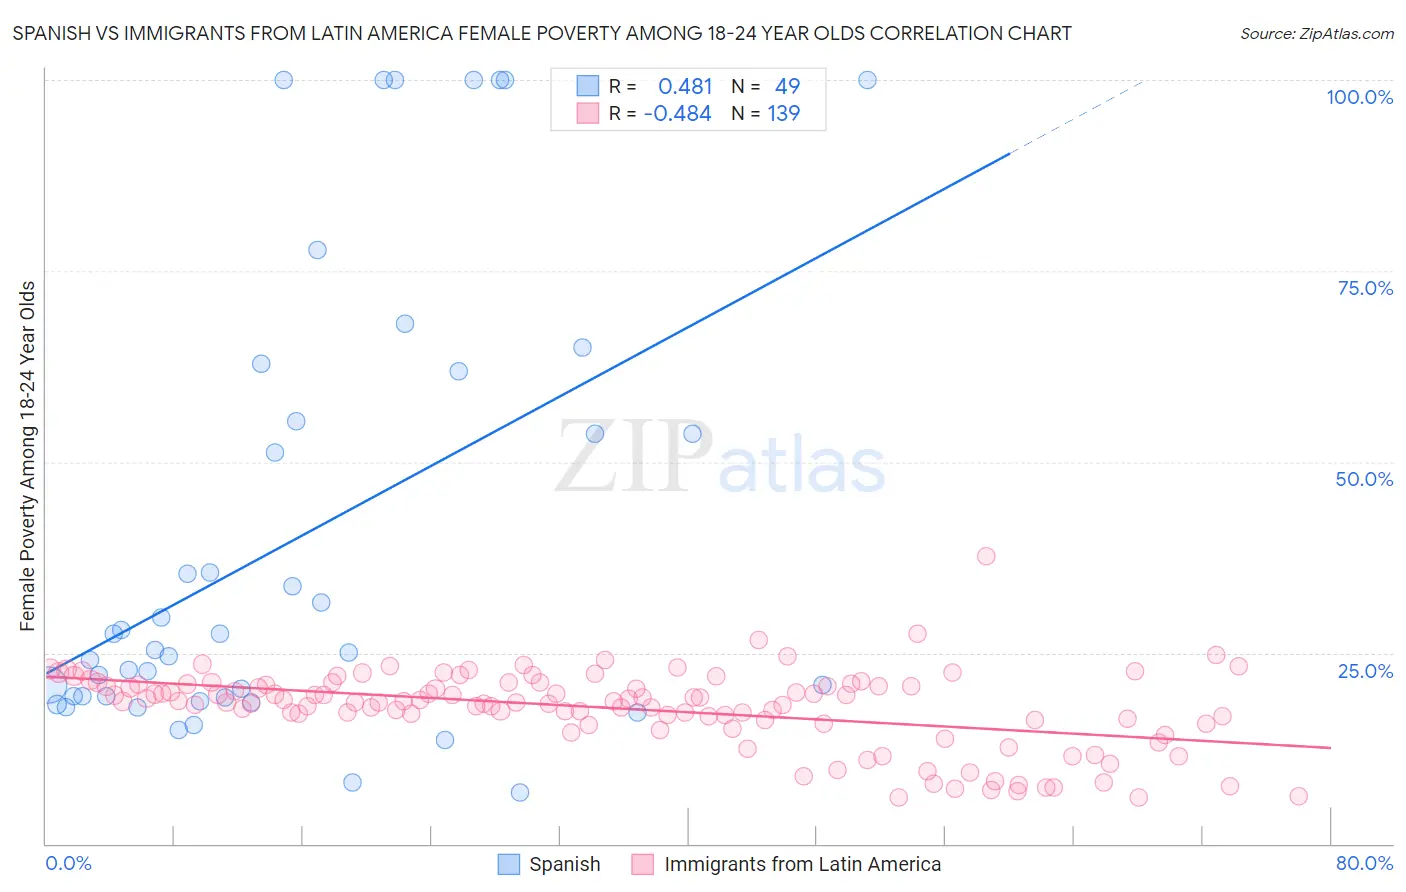 Spanish vs Immigrants from Latin America Female Poverty Among 18-24 Year Olds